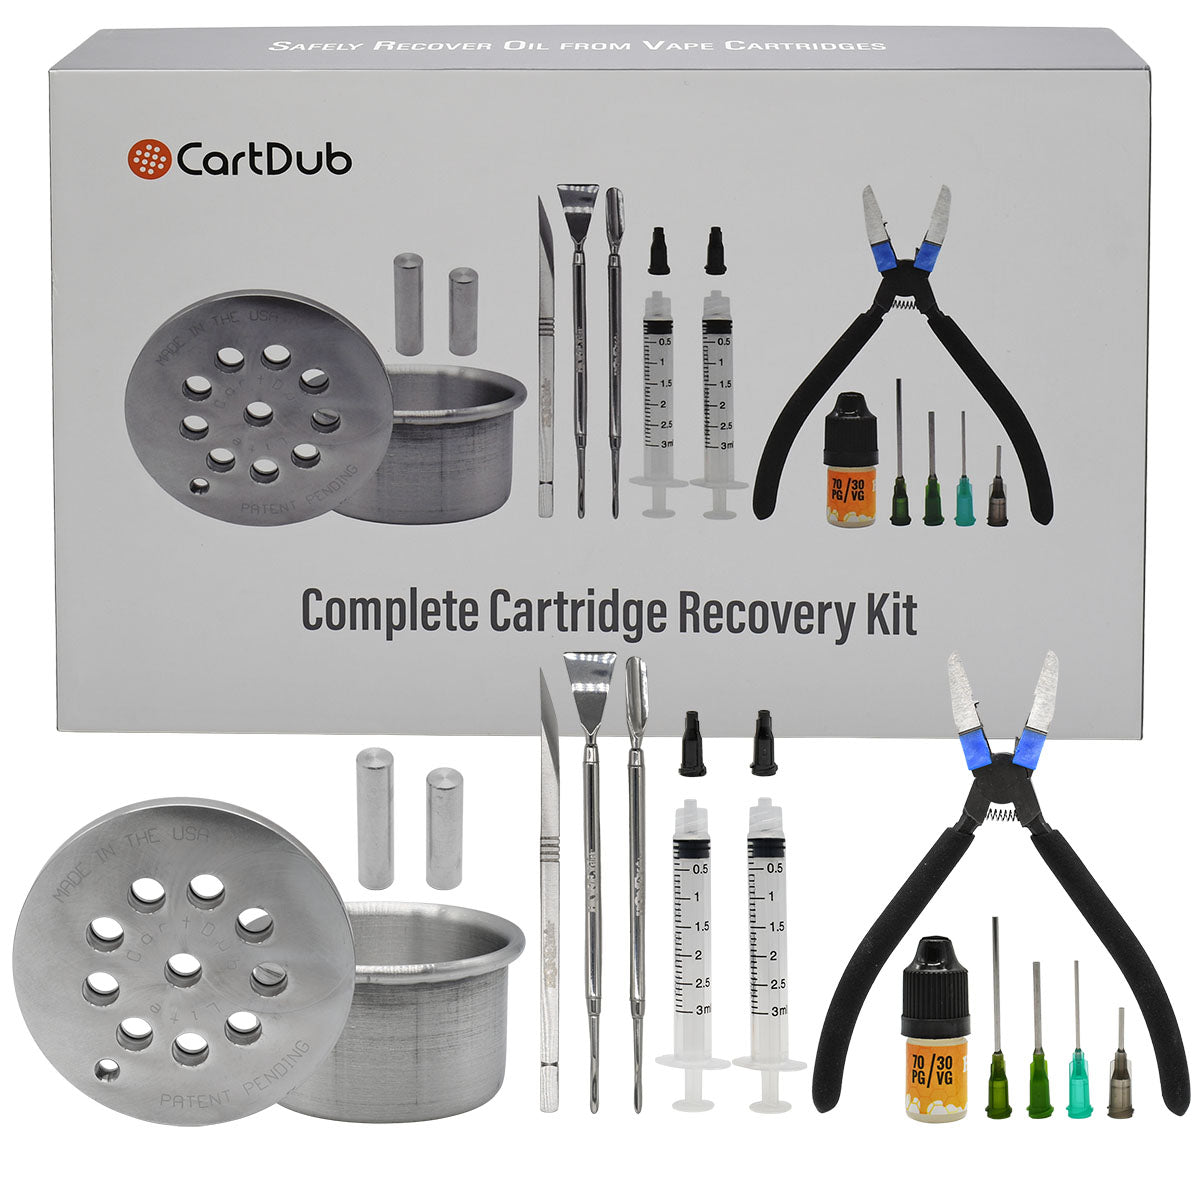 CardDub Complete Kit to open vape cartridge and remove oil from prefilled cartridge